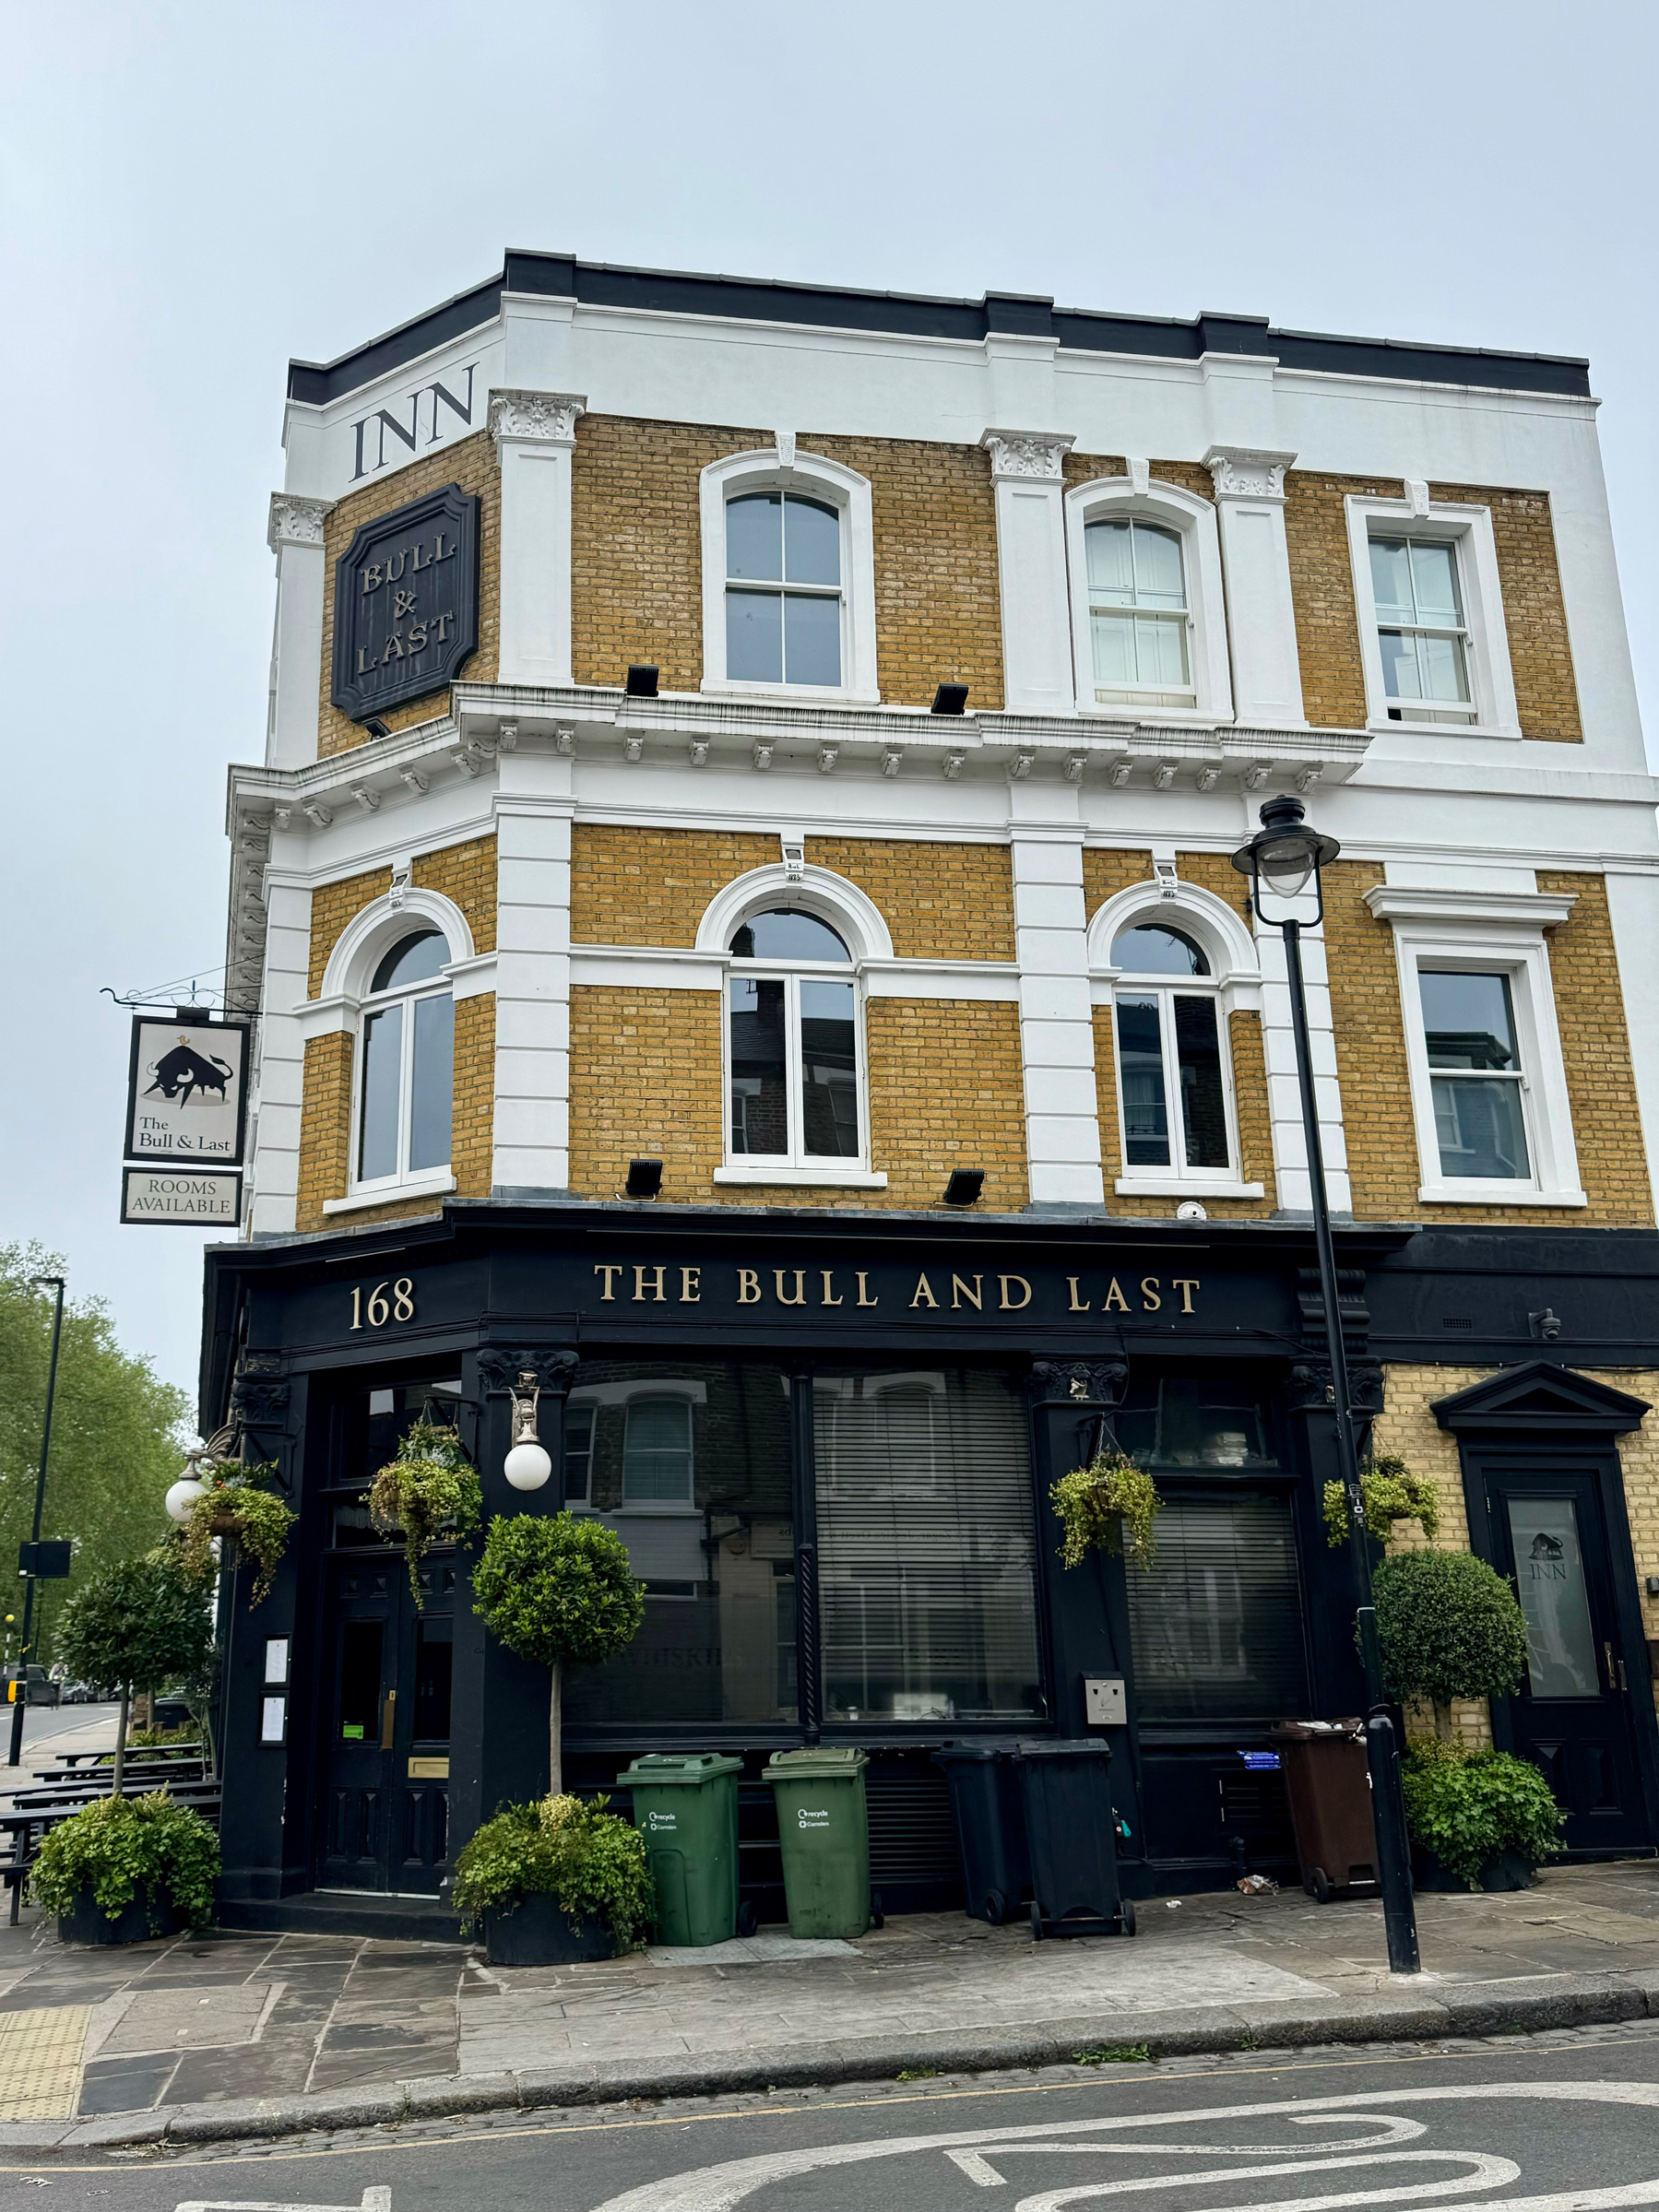 A traditional brick building housing “The Bull and Last” pub with a black facade, large windows, hanging plants, and road signs visible on a cloudy day.